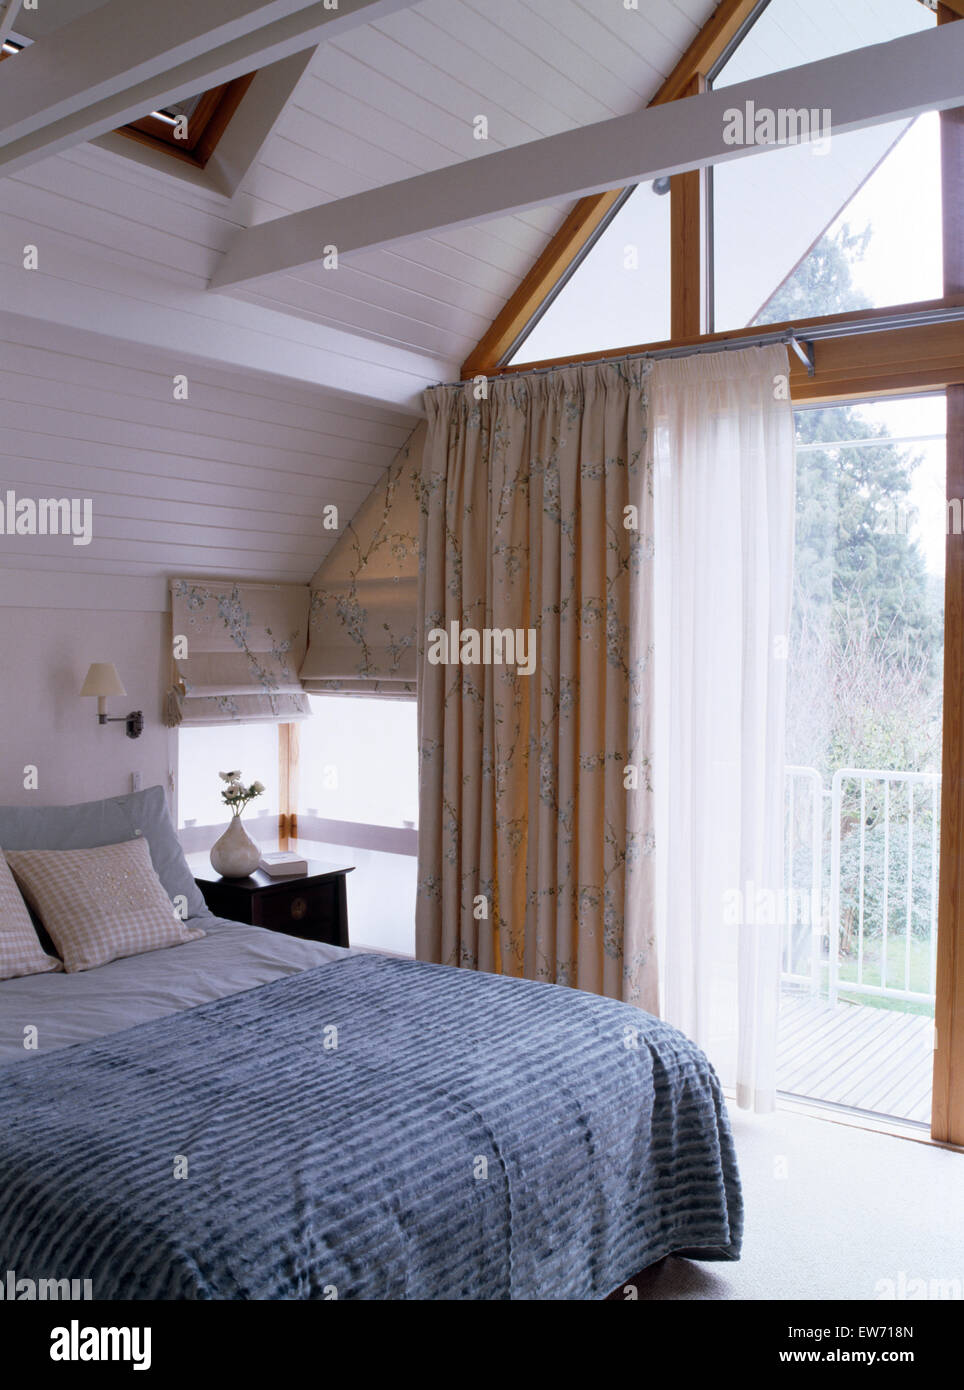 Blue-gray quilt on bed in modern loft conversion bedroom with floral drapes and white voile curtains at glass doors to balcony Stock Photo